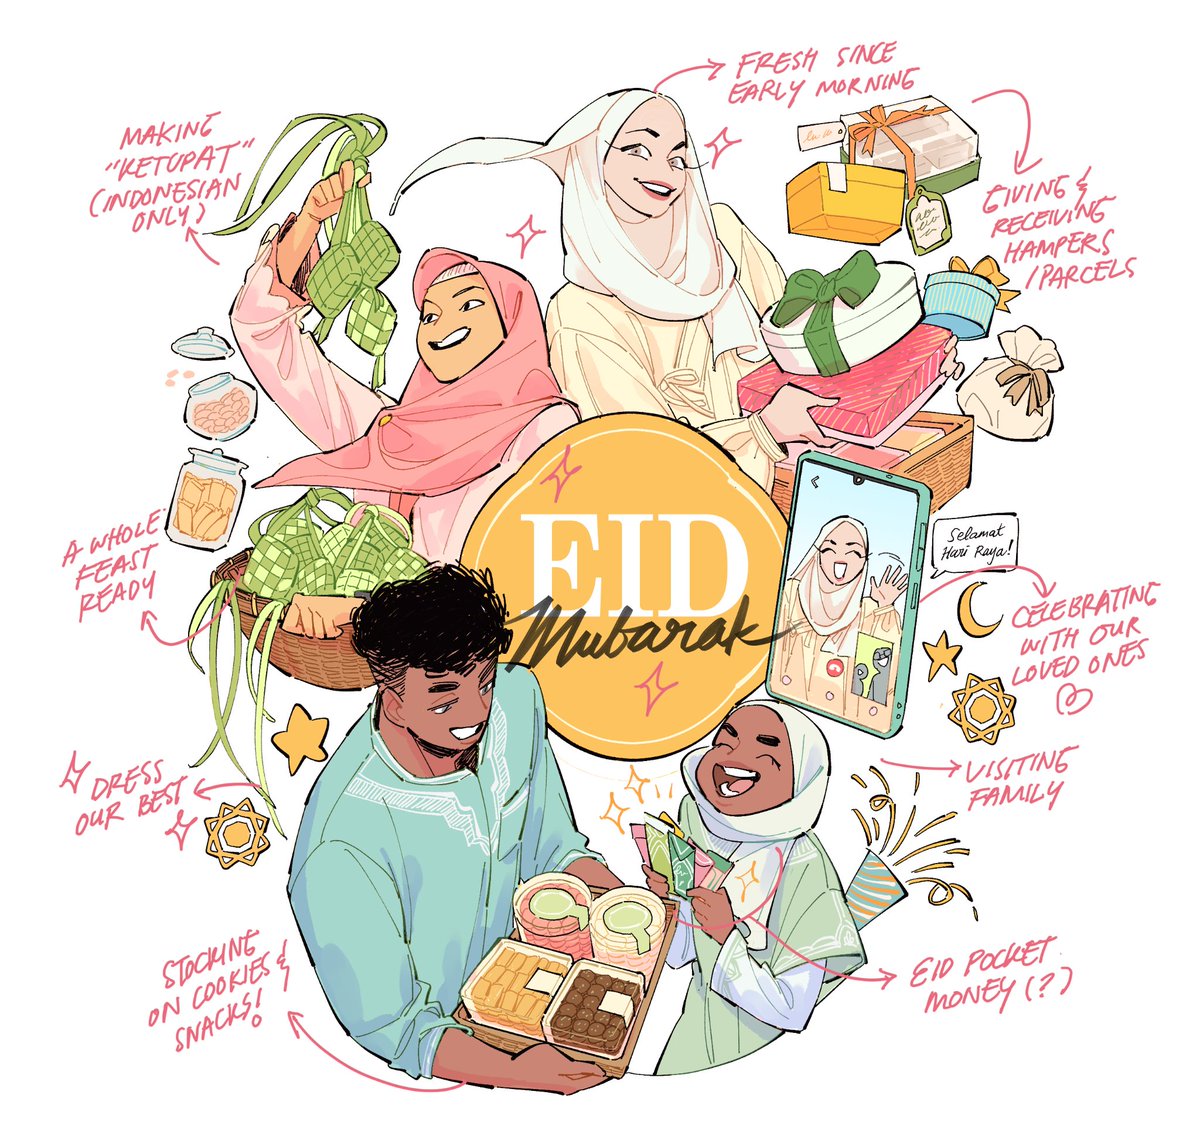 I made this illustration based on some fun Eid traditions we do in this special day. A little thread: